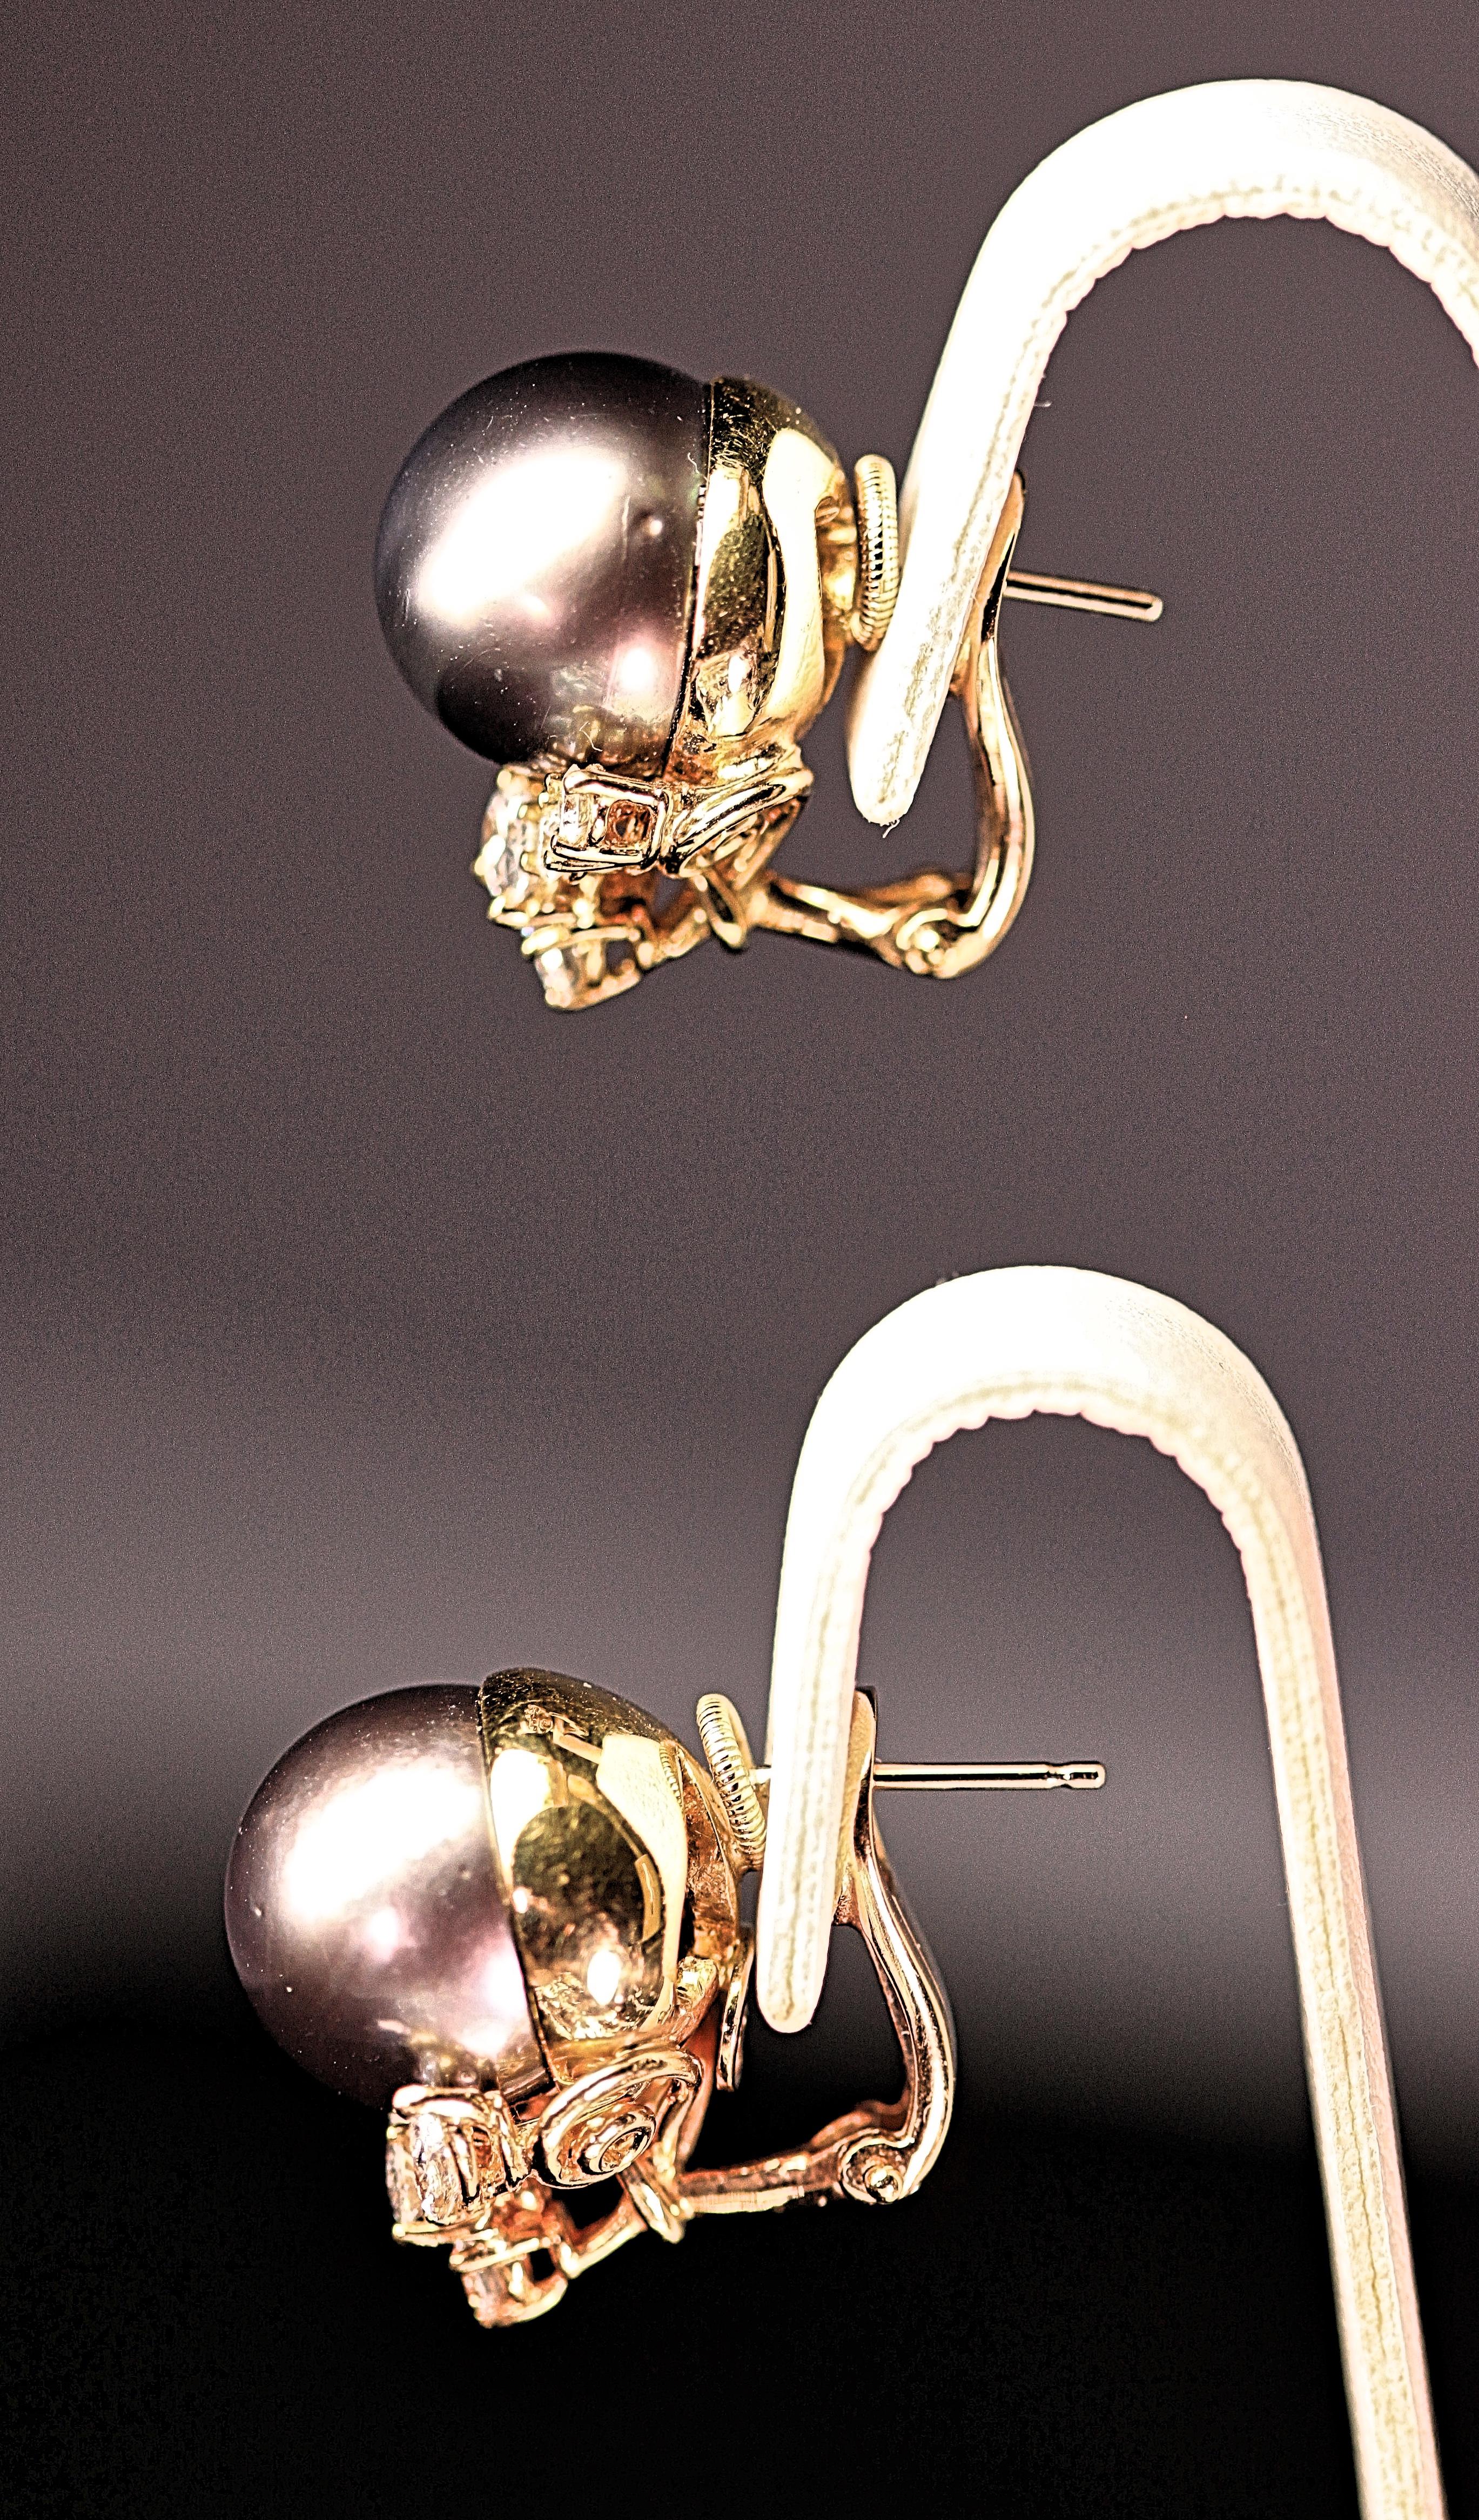 Beautiful black Tahitian 12 mm pearl and diamond earrings by Henry Dunay. The Tahitian pearls measure 12 mm each with minor blemishes and excellent luster. The Tahitian pearls have 5 diamonds below the pearls. The diamond shapes are 2 marquises, 2